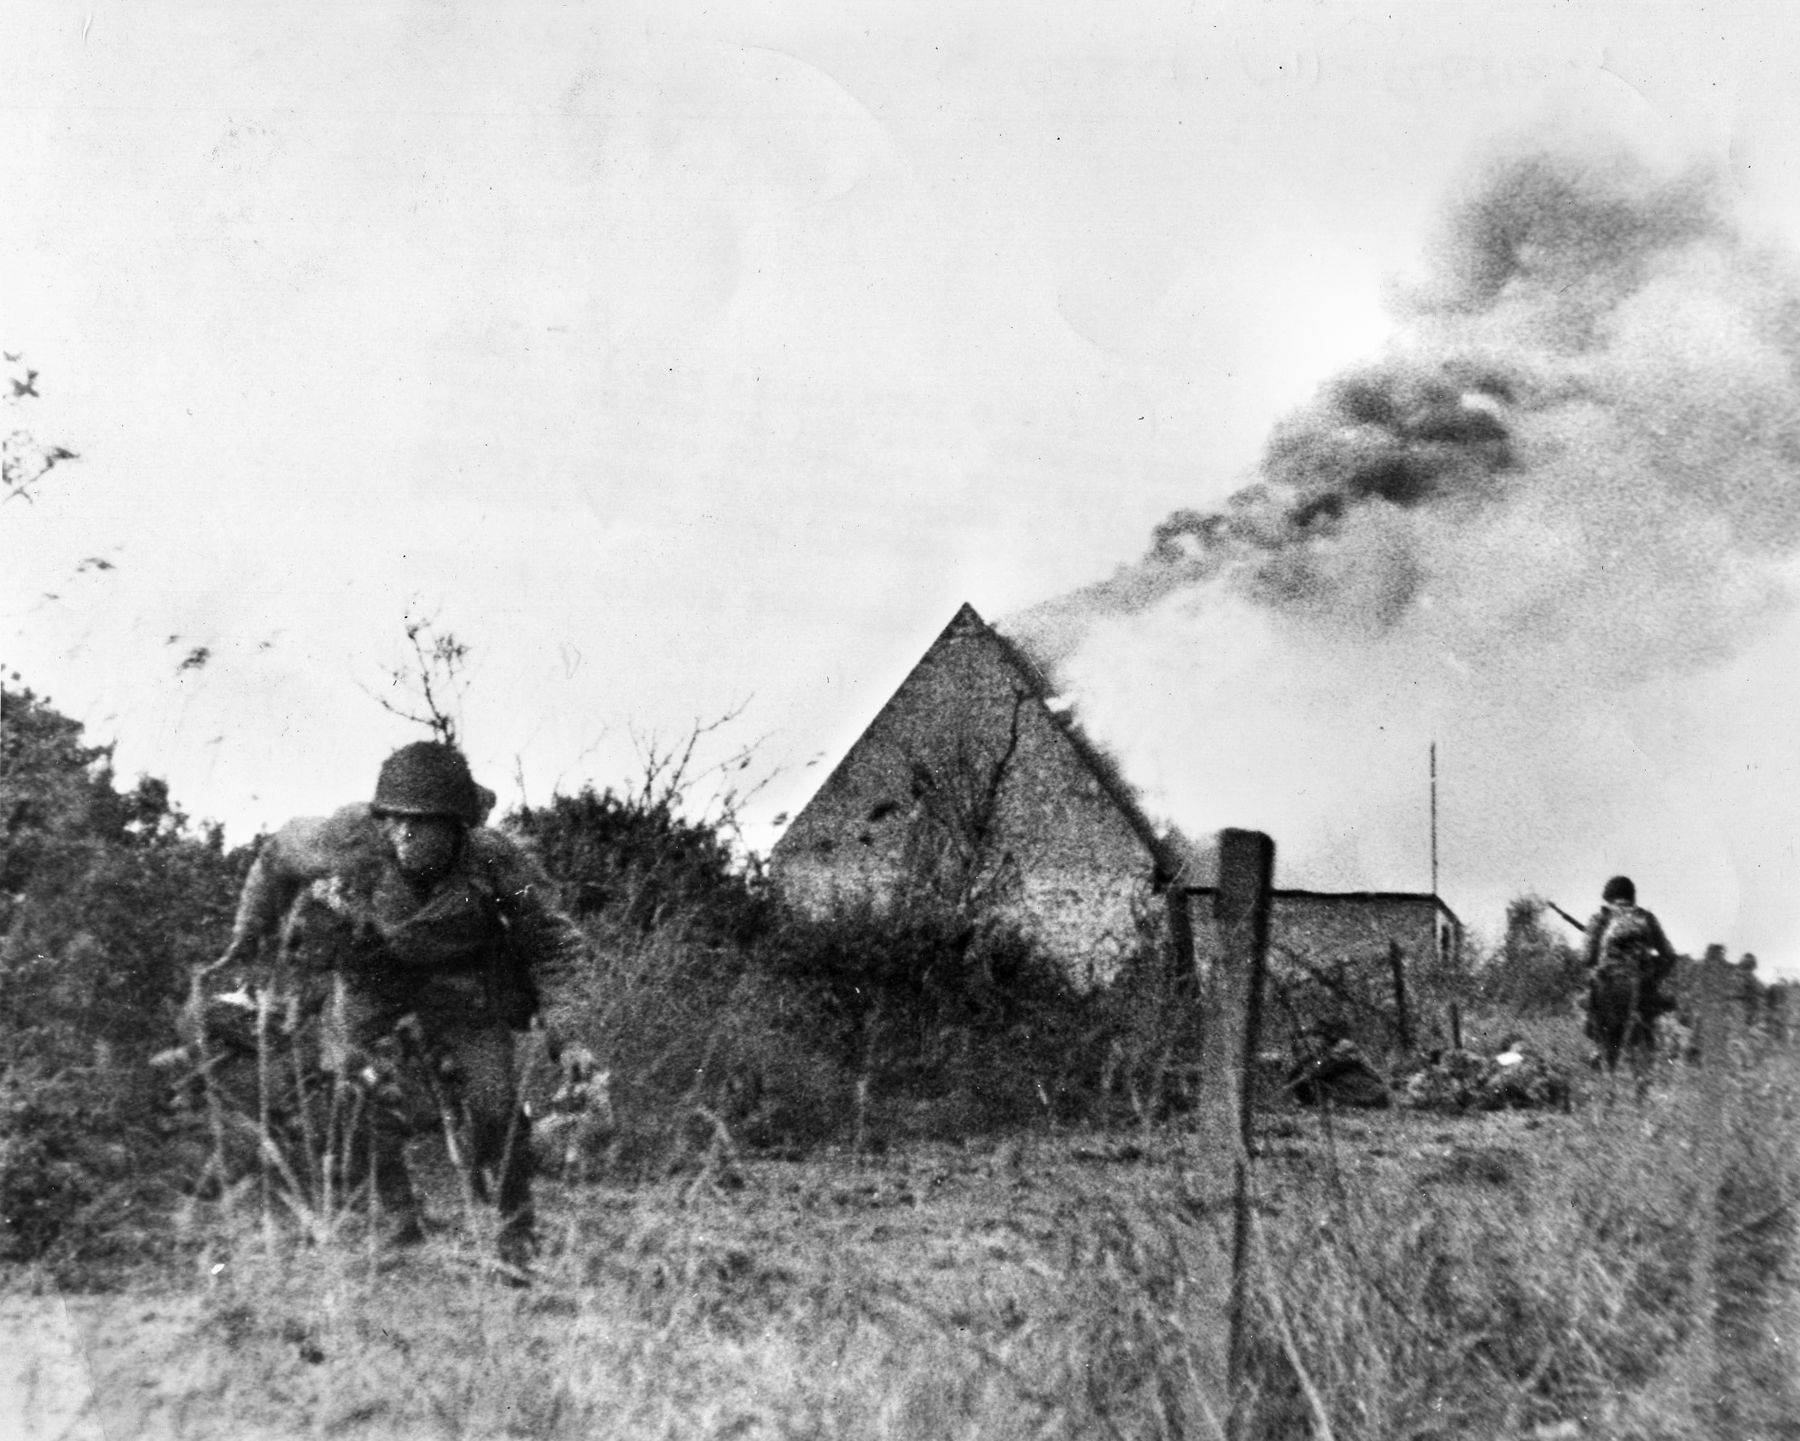 American soldiers scramble away from a burning house in Normandy. Mauser fired into a similar house filled with Germans in Vierville.